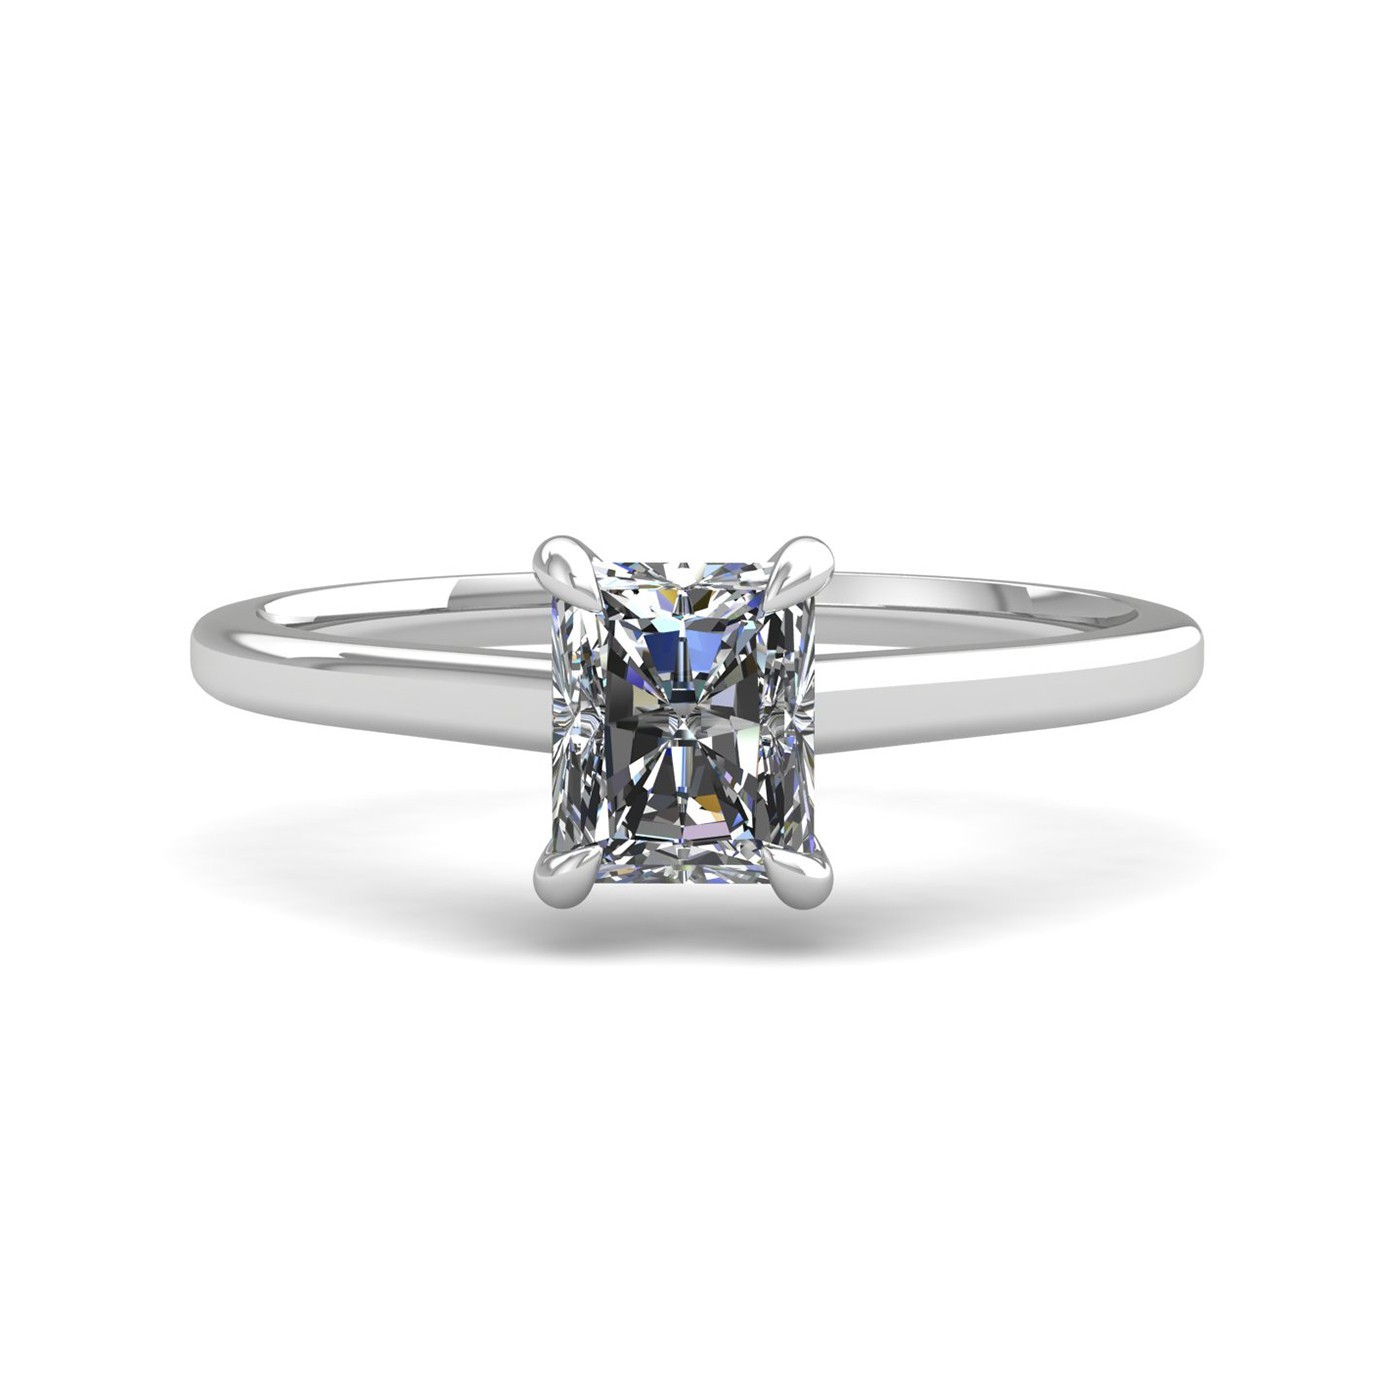 18k white gold  2,00 ct 4 prongs solitaire radiant cut diamond engagement ring with whisper thin band Photos & images